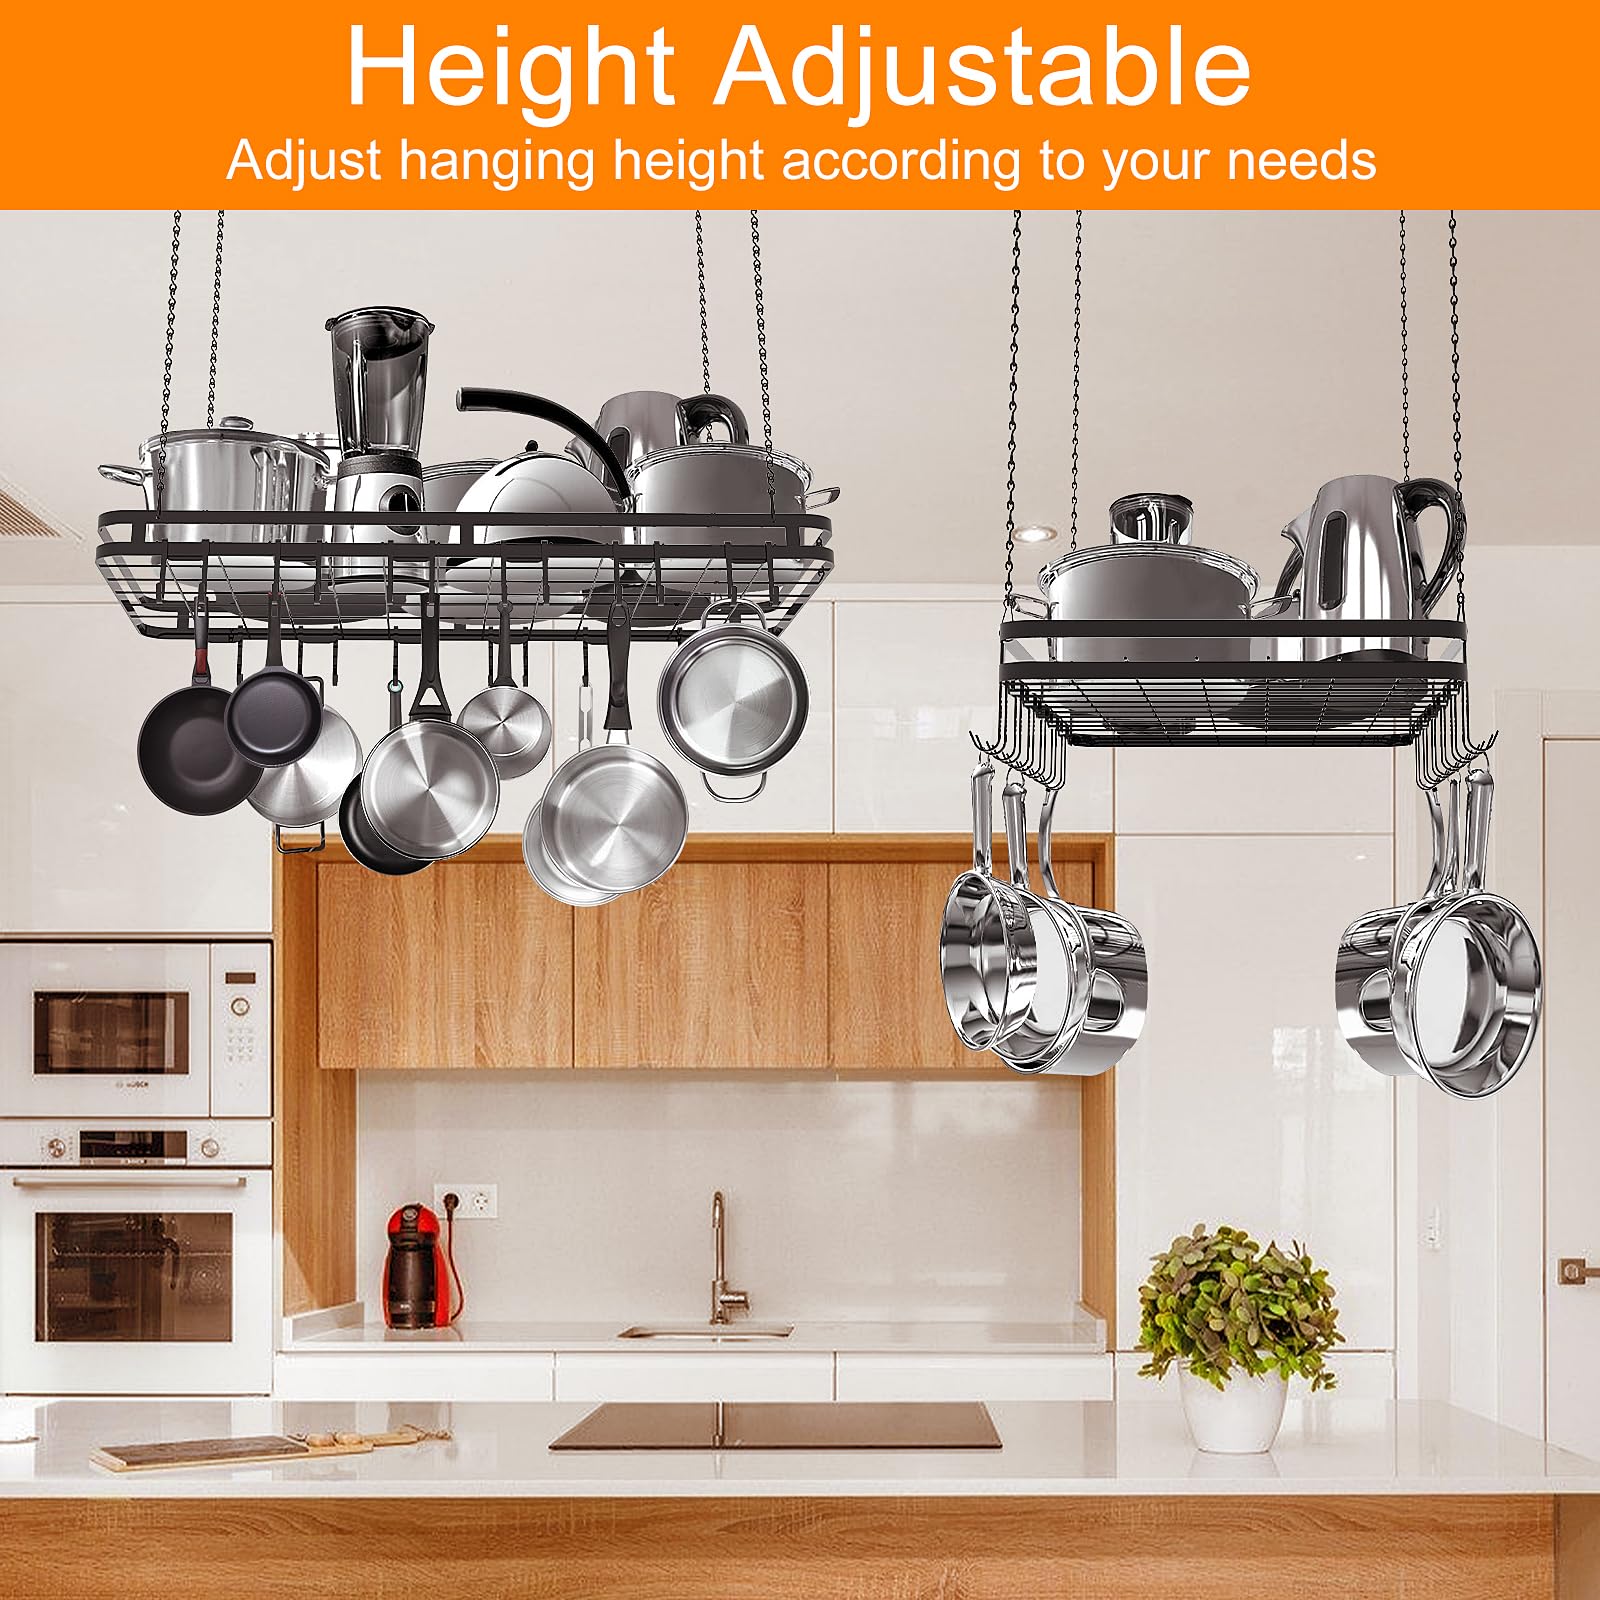 Amtiw 31.5 Inches Ceiling Pot Rack and Pan Rack for Ceiling with 12 Hooks, Storage Rack Multi-Purpose Organizer for Kitchen Organization, Home, Restaurant, Kitchen Cookware